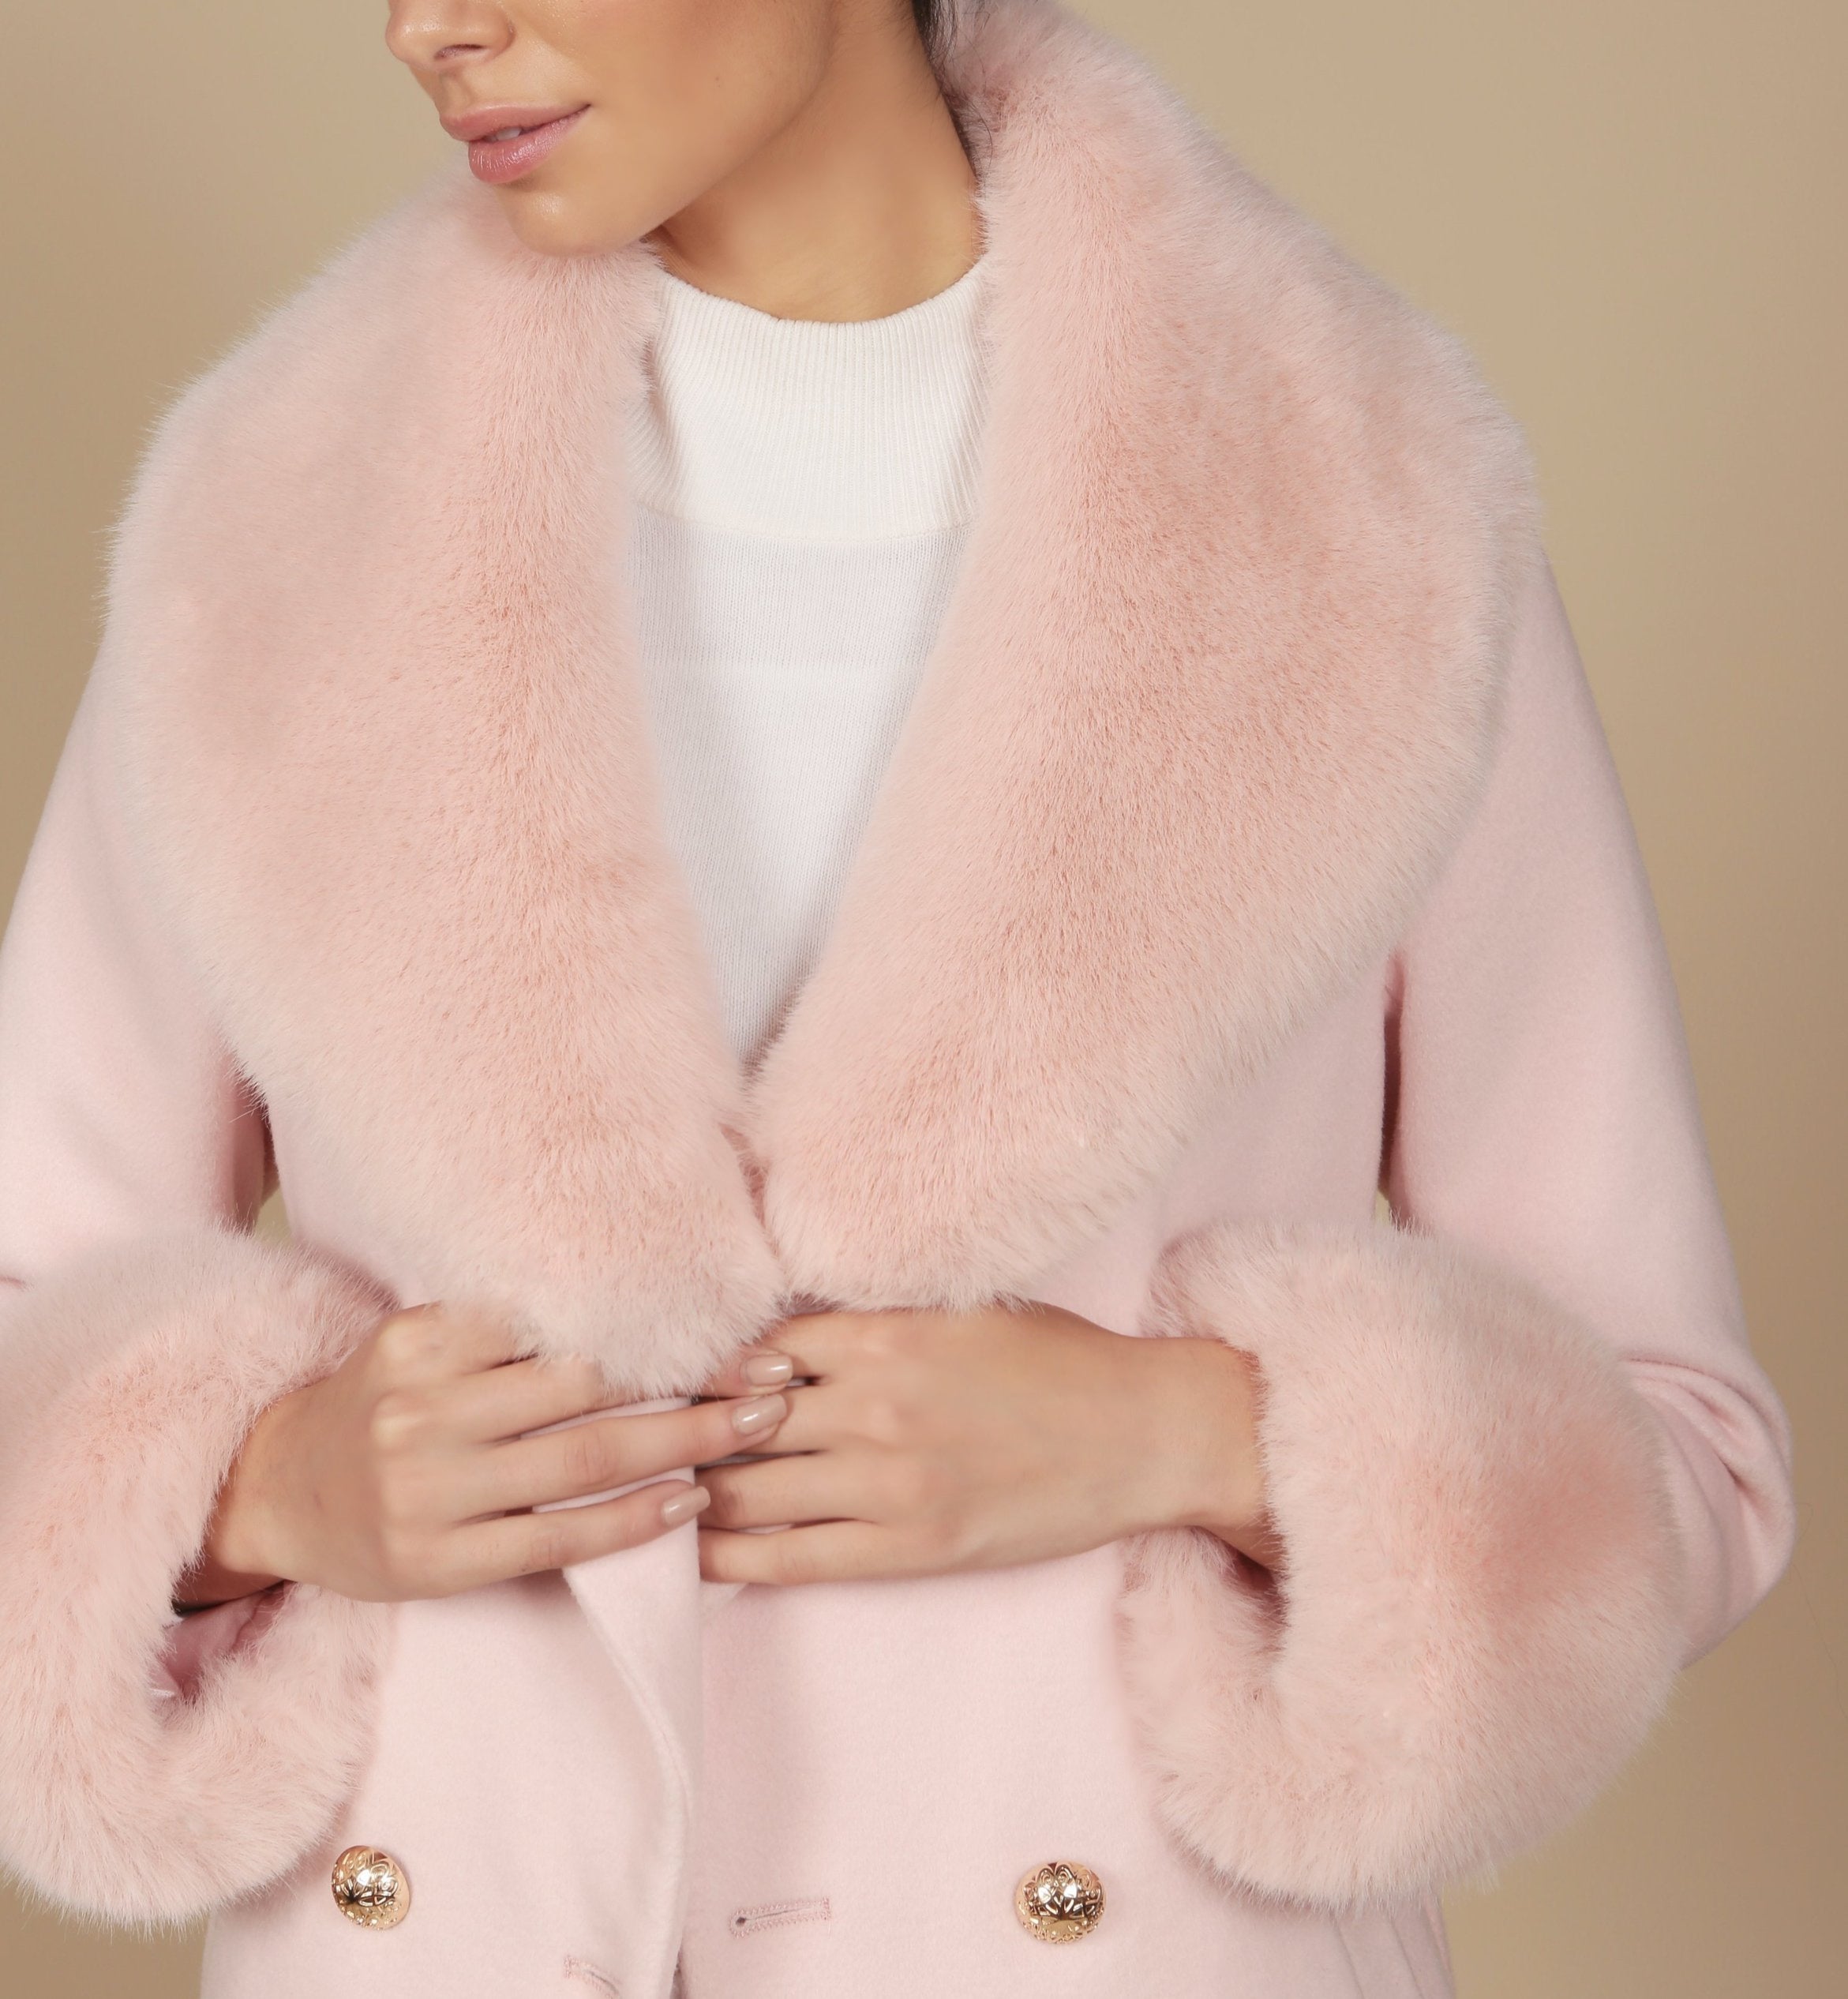 'Marlene' Cashmere and Wool Coat in Rosa